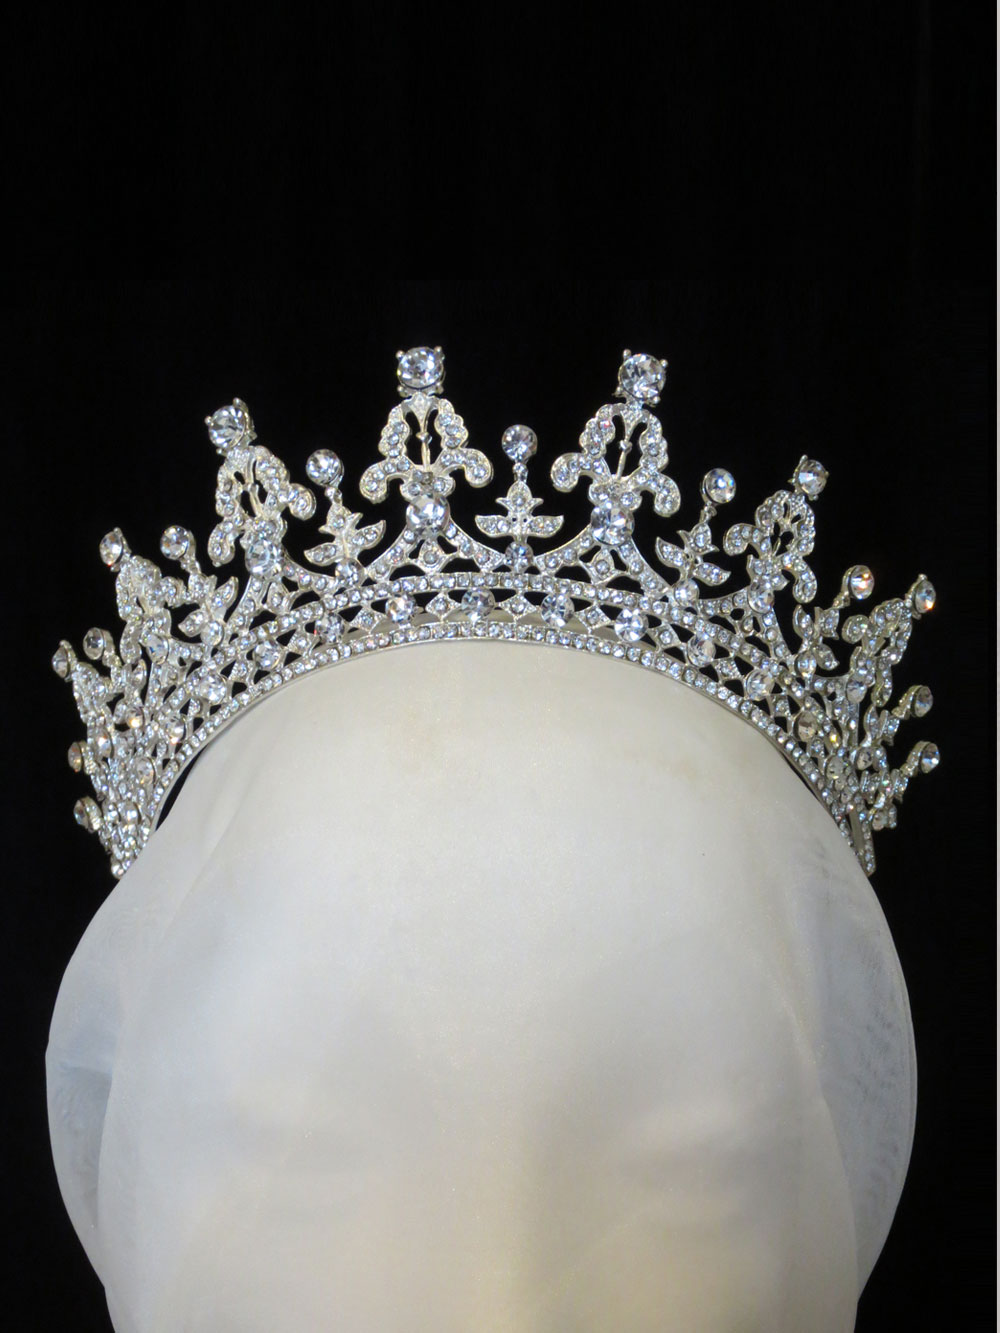 John-Zimmerman-Couture-Headpieces-and-Tiaras-Model-Diamond-Gallery-Image-1